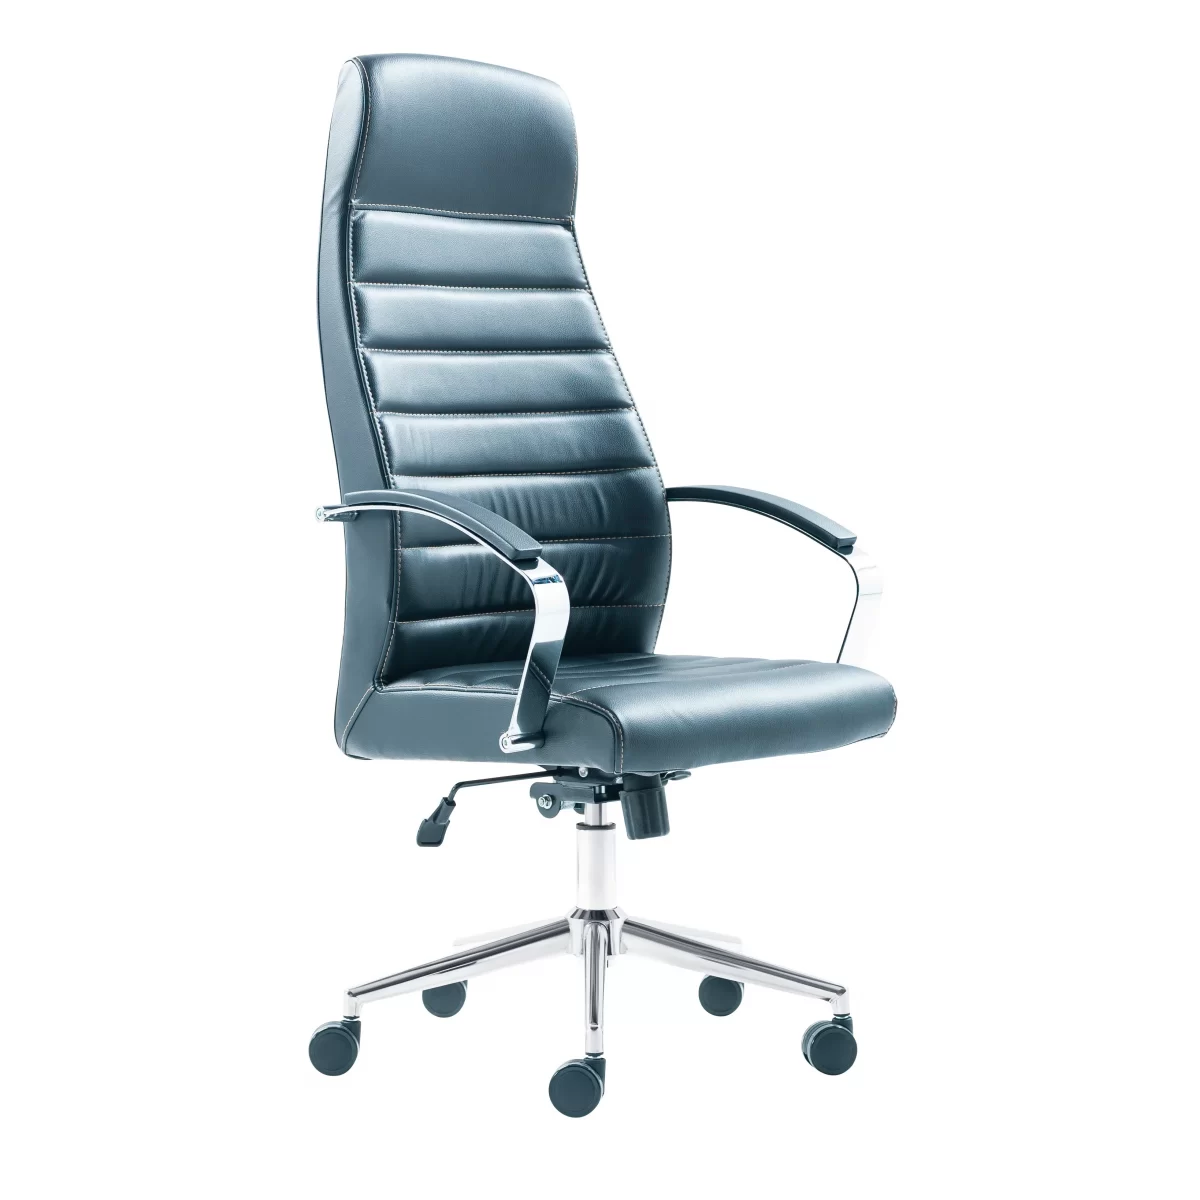 Akron Executive Office Chair Modern Office Chairs Turkey 2 scaled